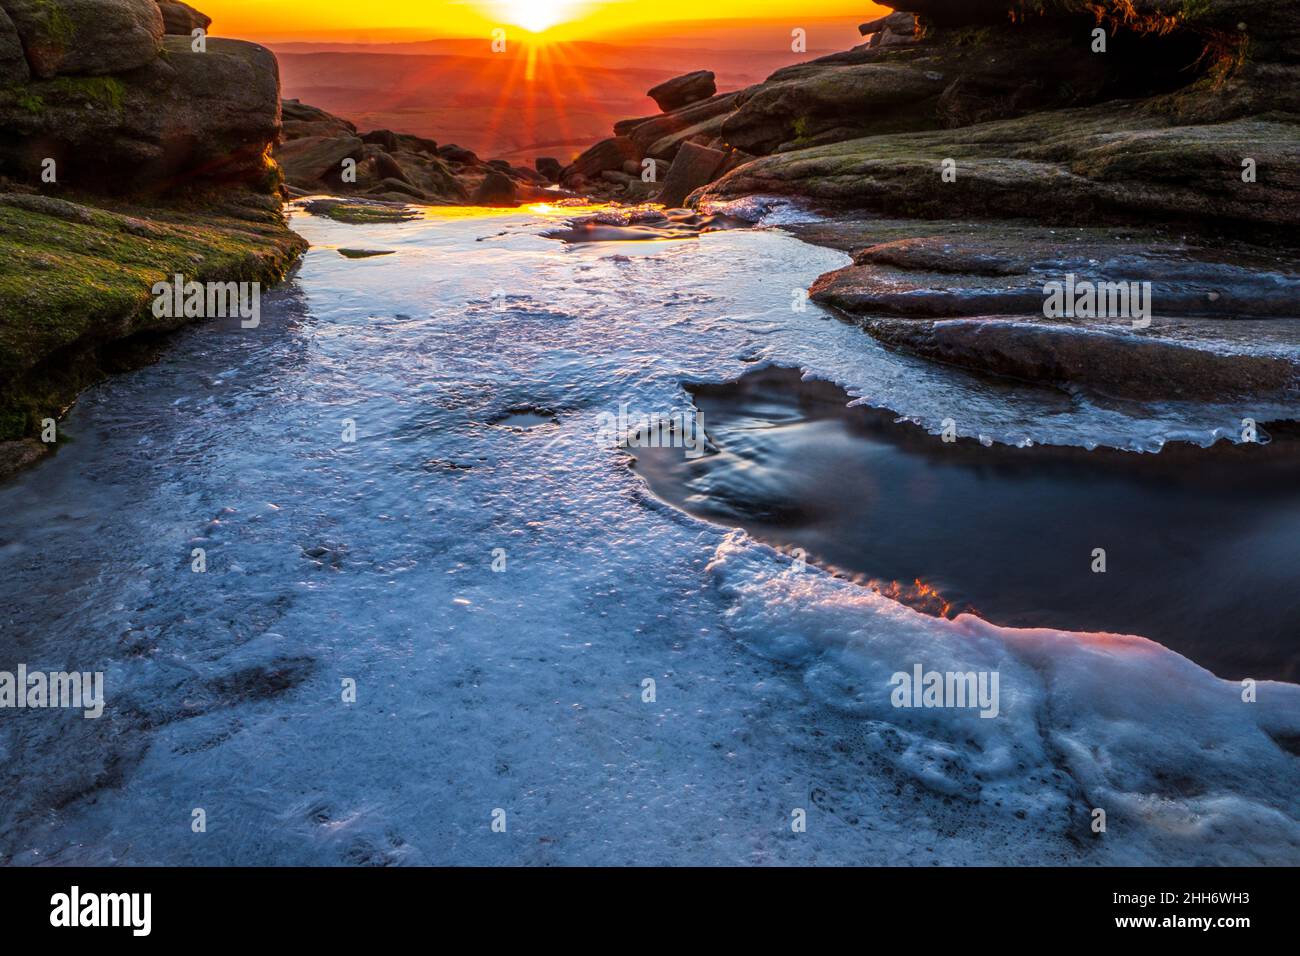 Ice on The river Kinder at Kinder Downfall in the Peak District, setting sun in the distance Stock Photo